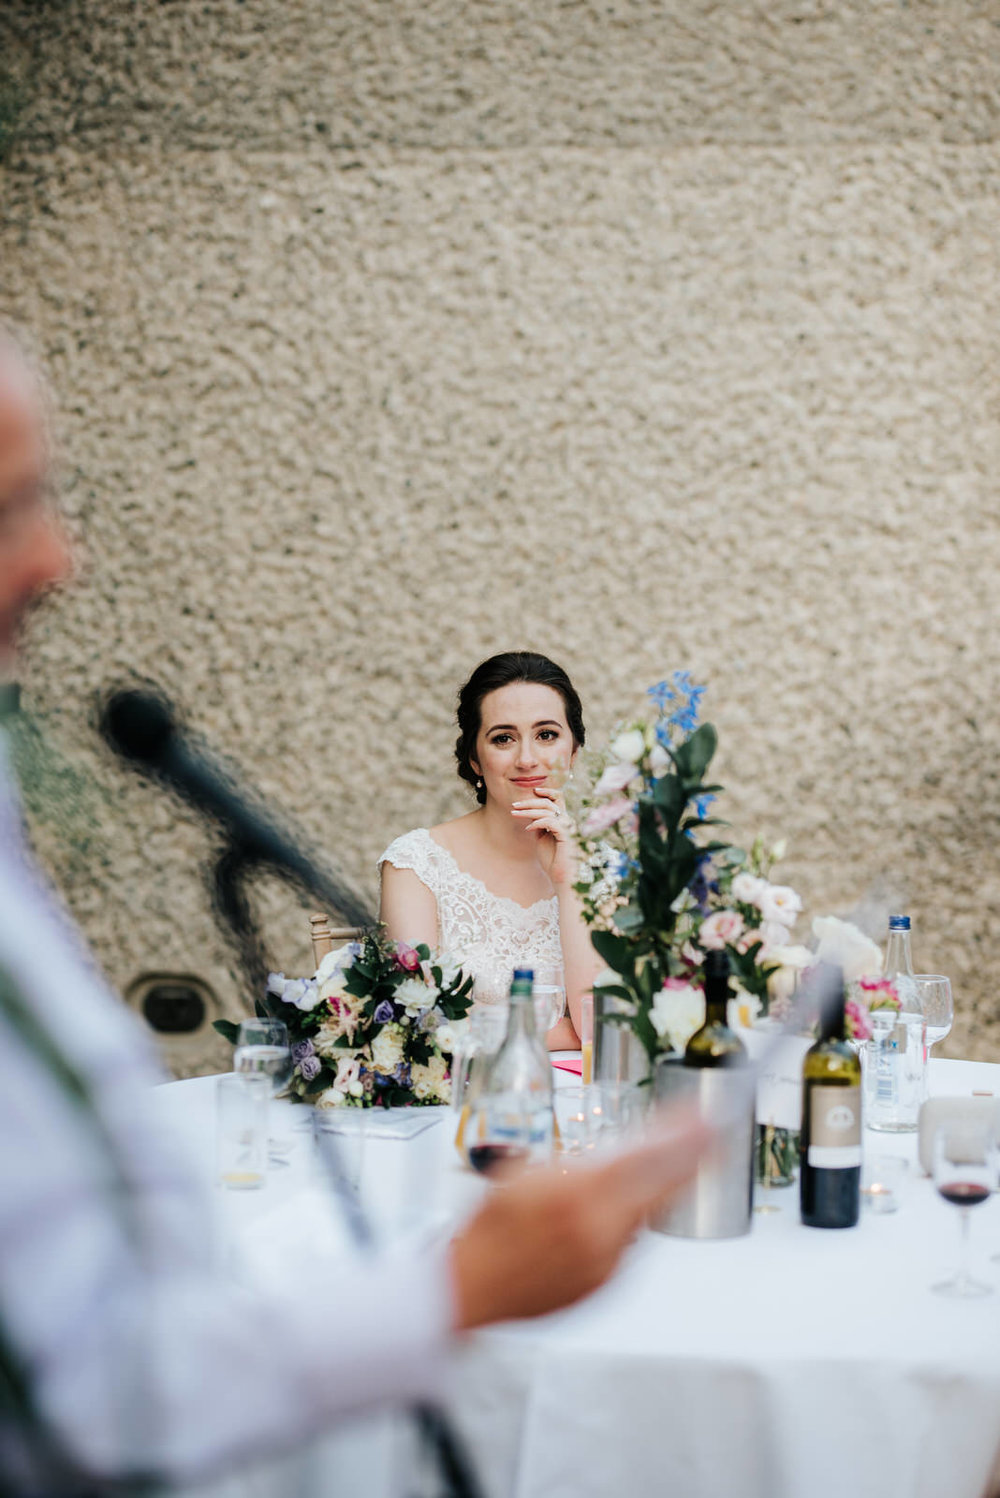  Bride looks emotional and grateful as close family member delivers a wedding speech 